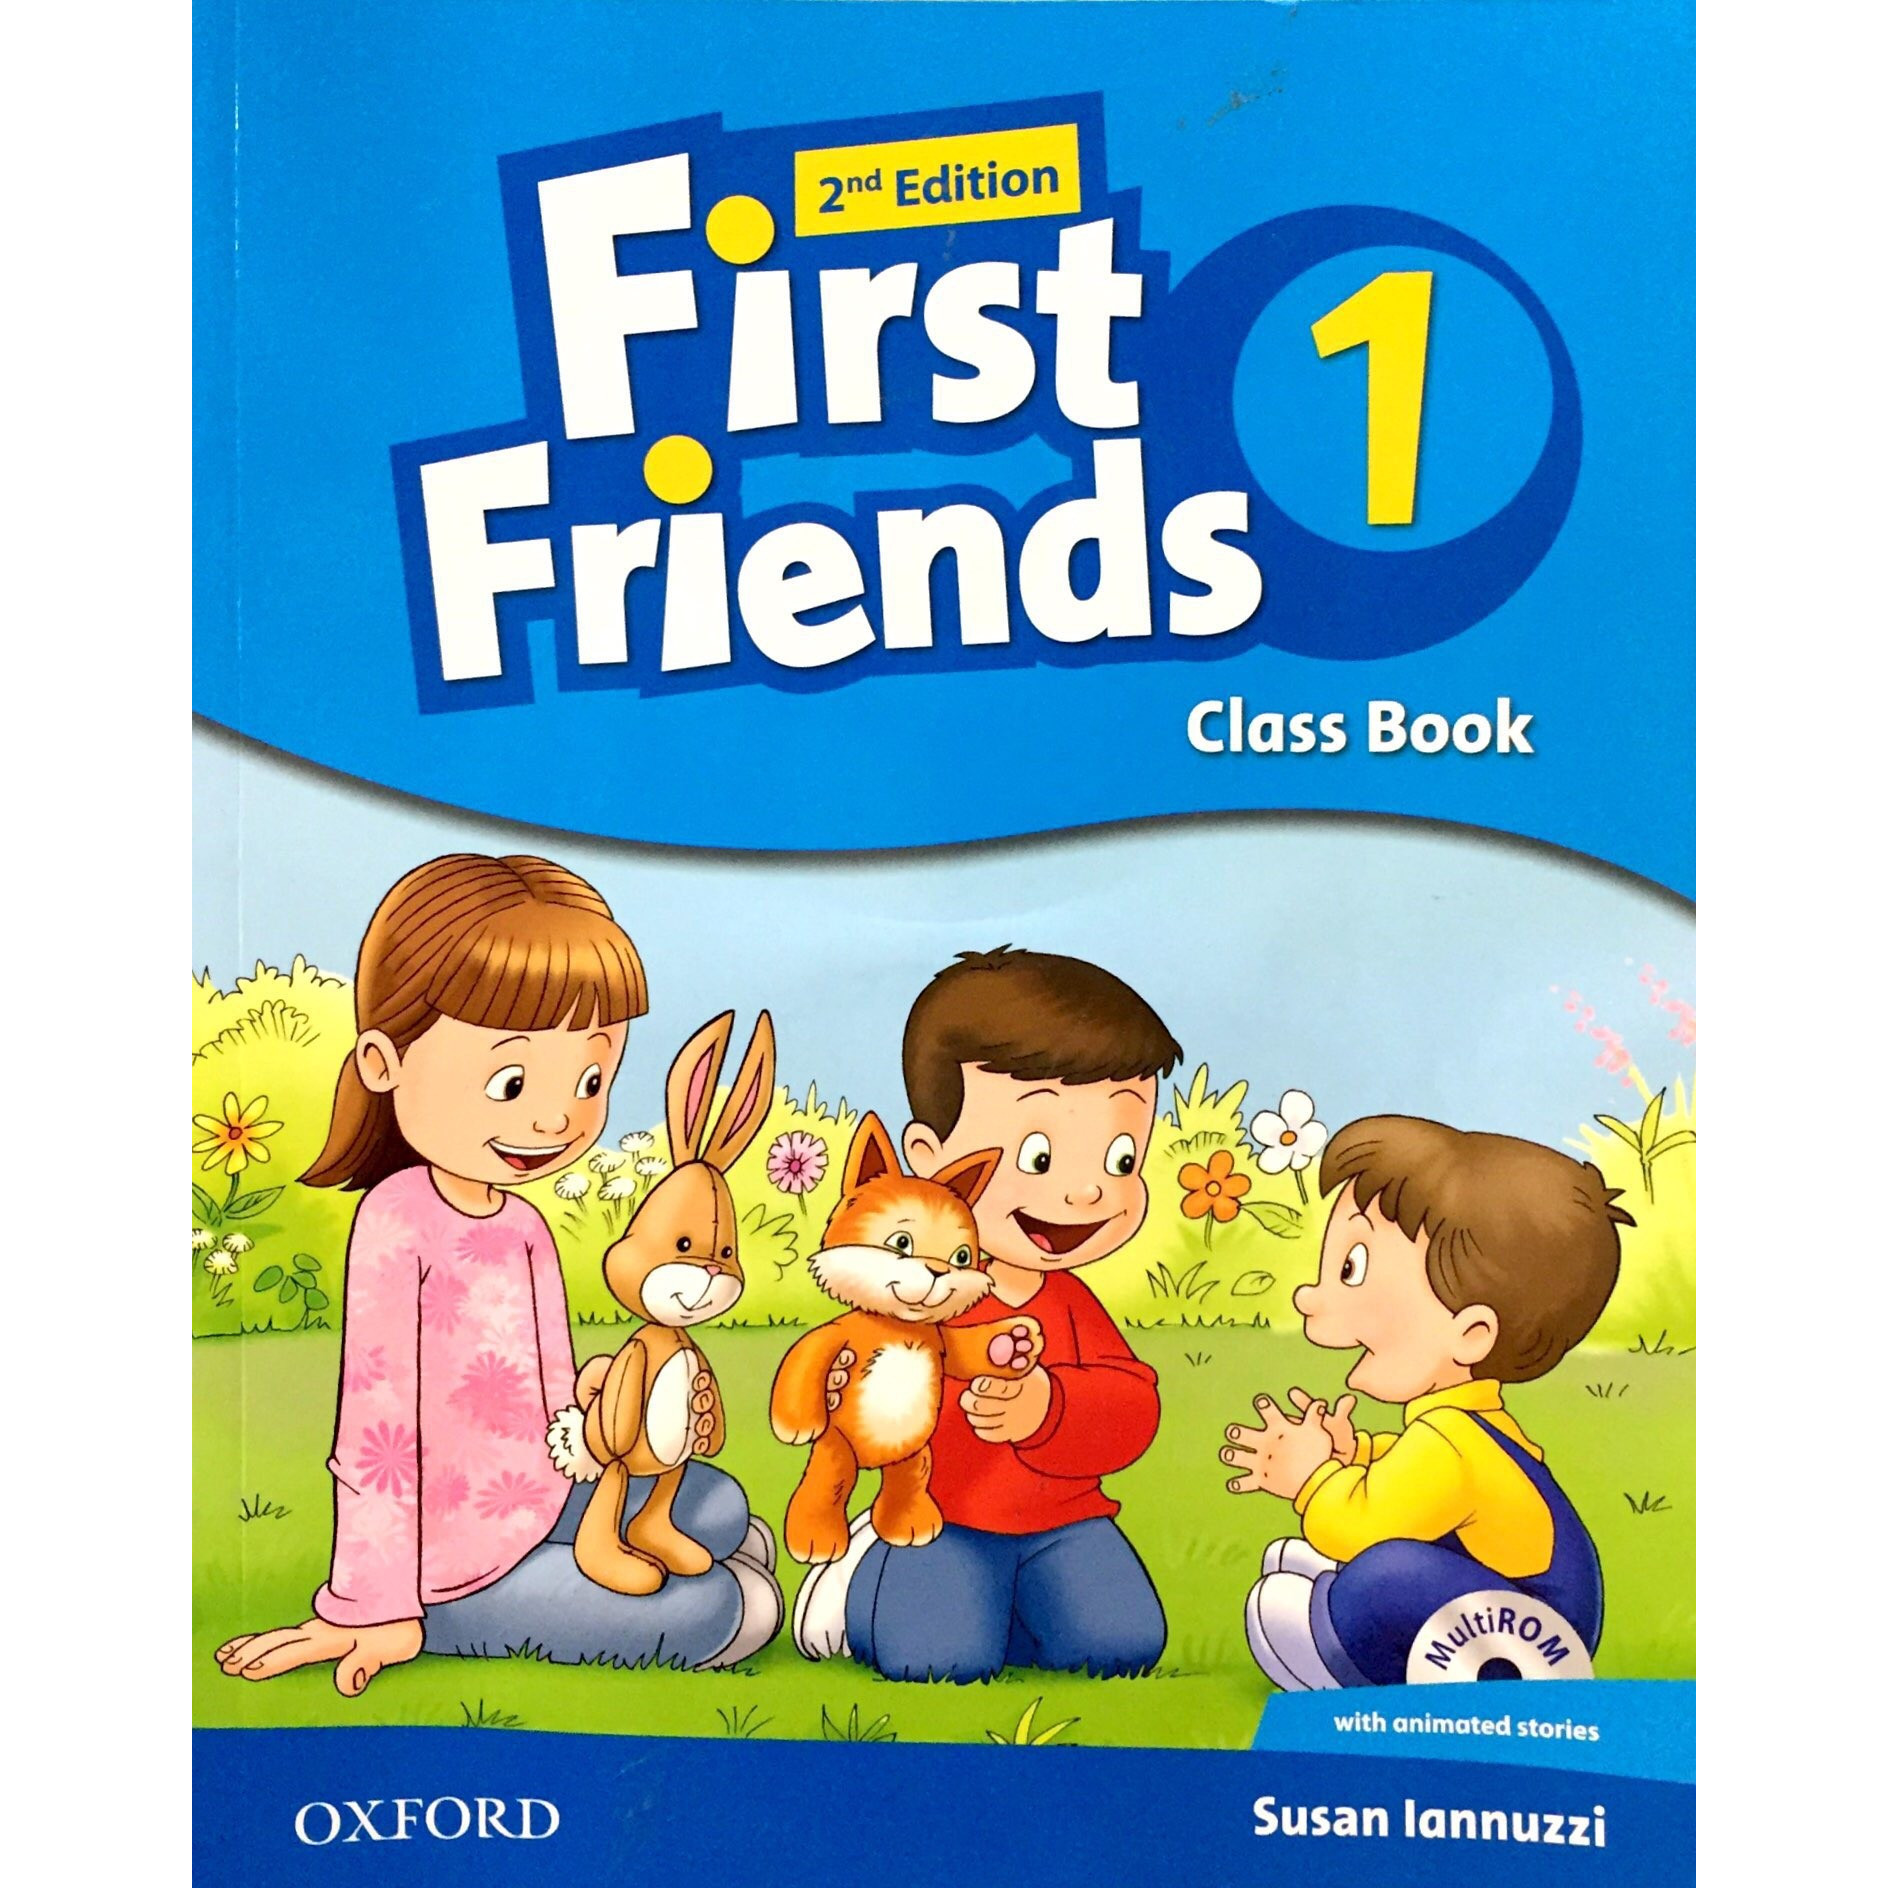 First Friends 1 Classbook (include MultiROM with Animated Stories) (2nd Edition)